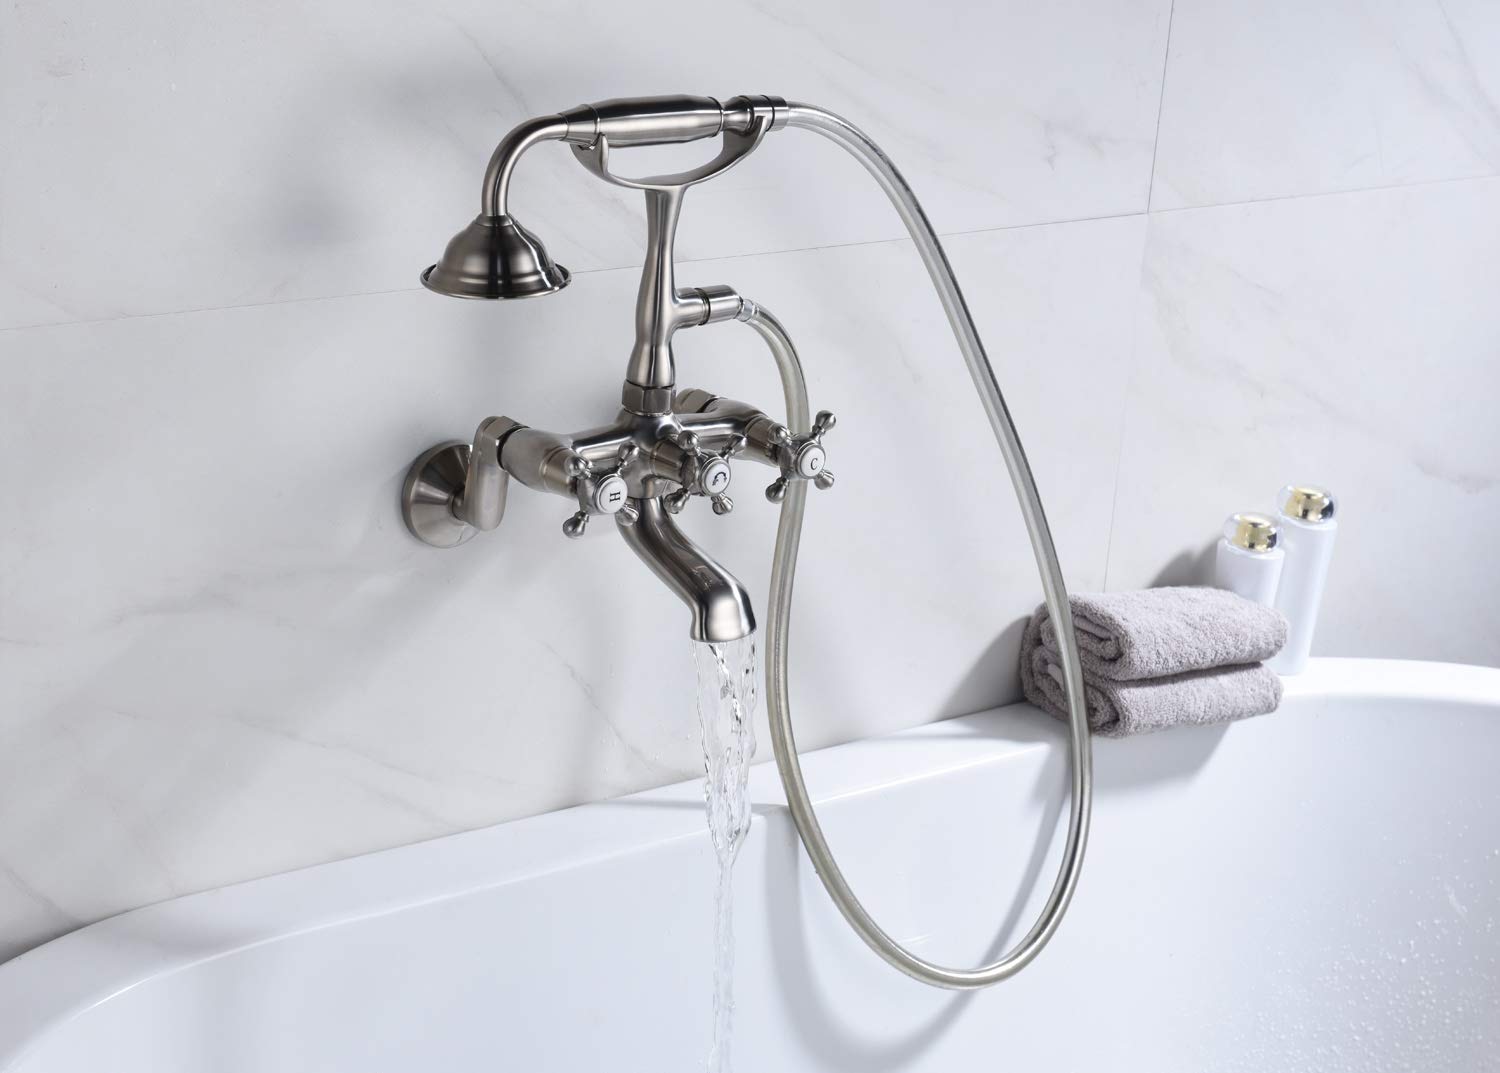 Sumerain Clawfoot Tub Faucet Brushed Nickel, Bathtub Faucet with Shower